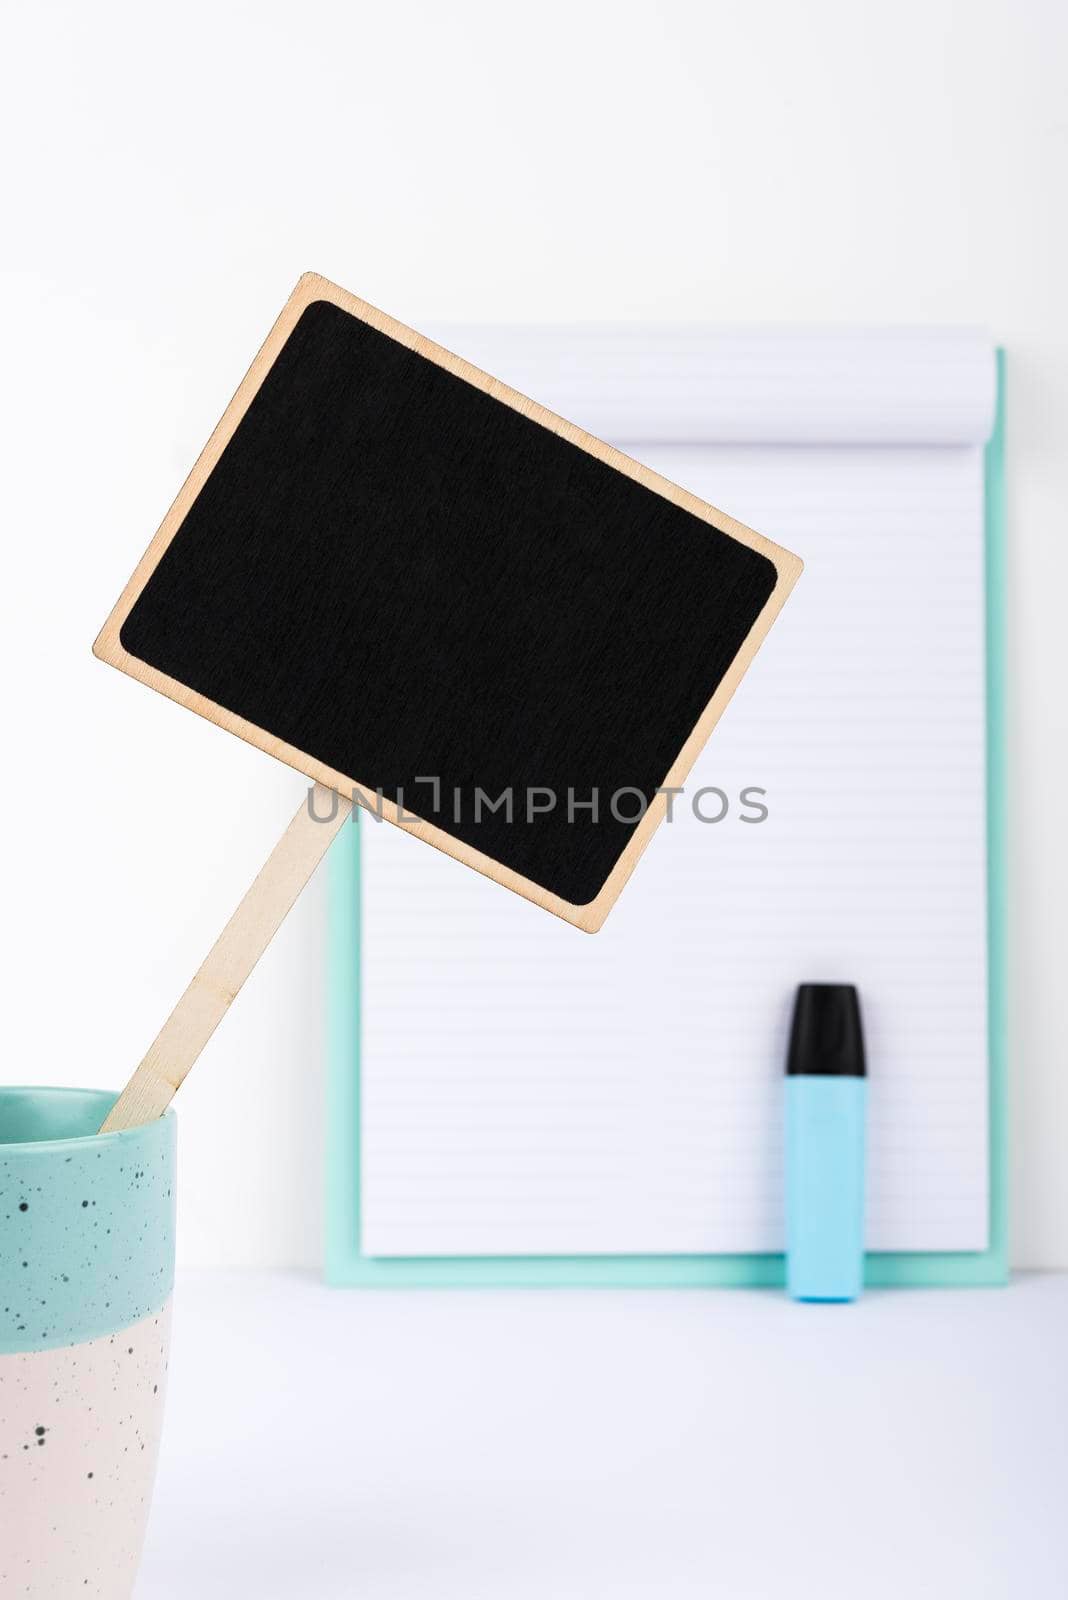 Small Blackboard With Important Message In Cup On Desk With Clipboard.